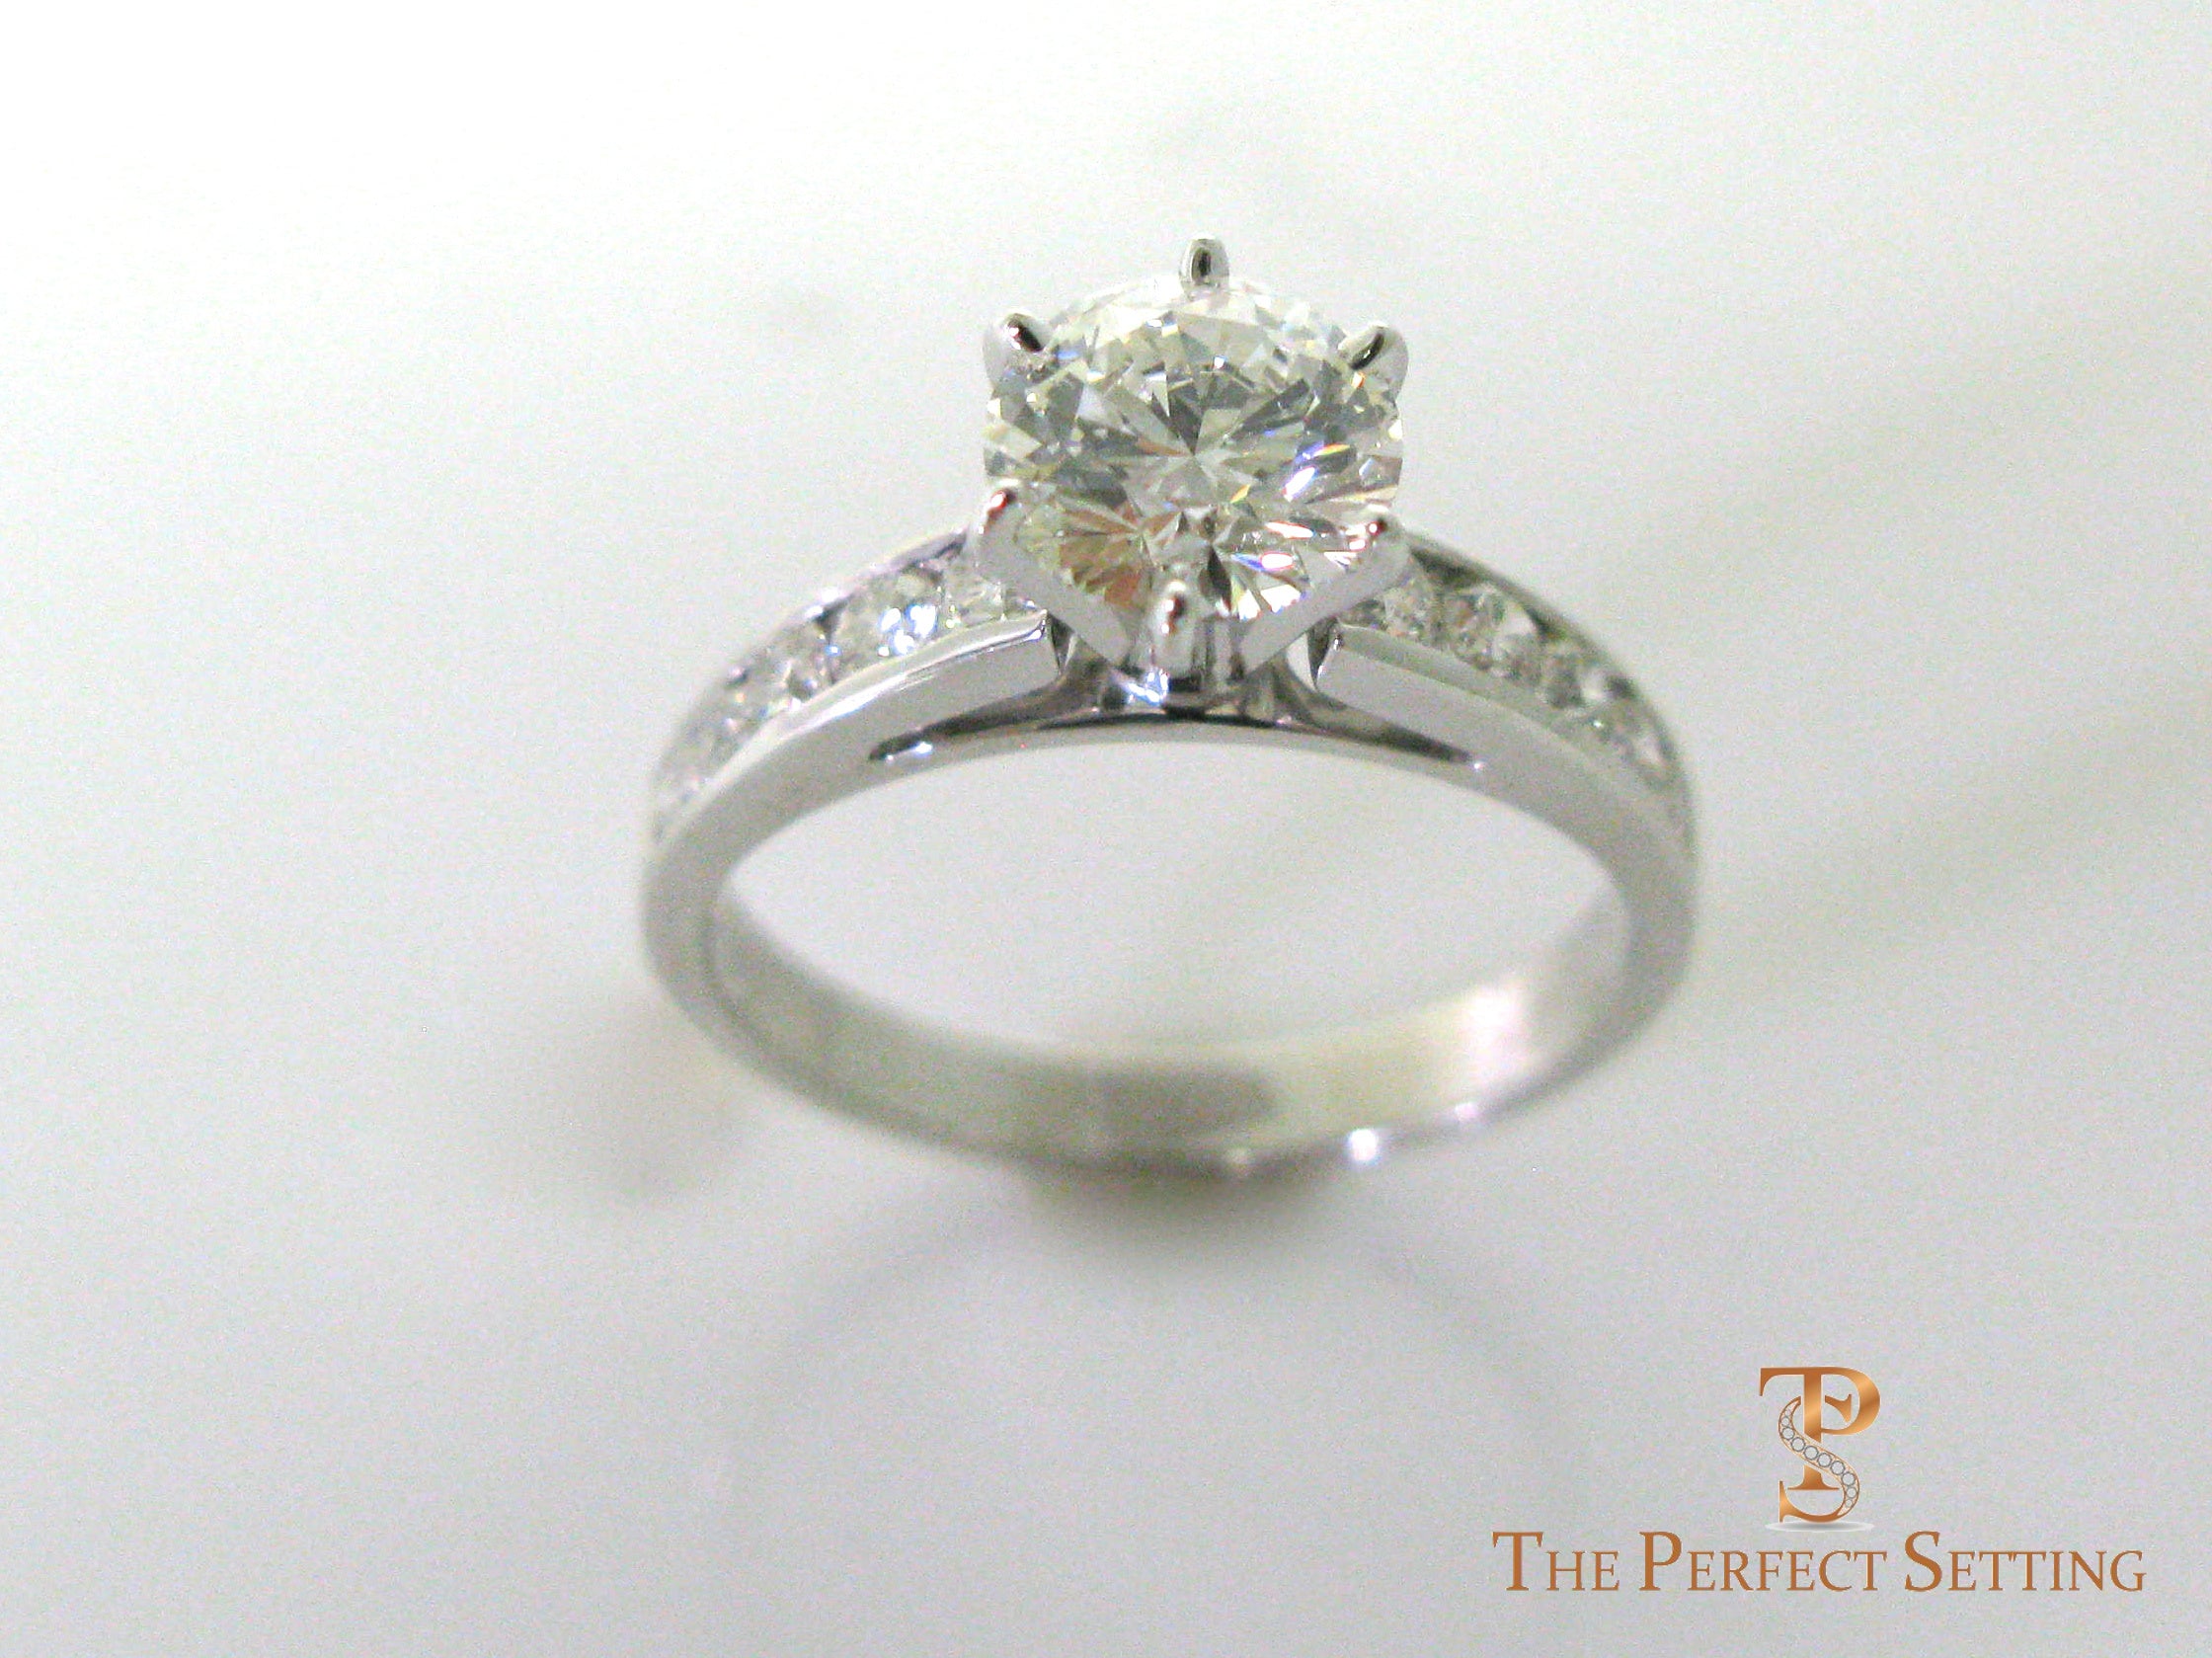 Unique Diamond 6 Prong Channel Set Diamond Engagement Ring - with A 1 ct Center Round Cut GIA Natural Diamond in Yellow Gold